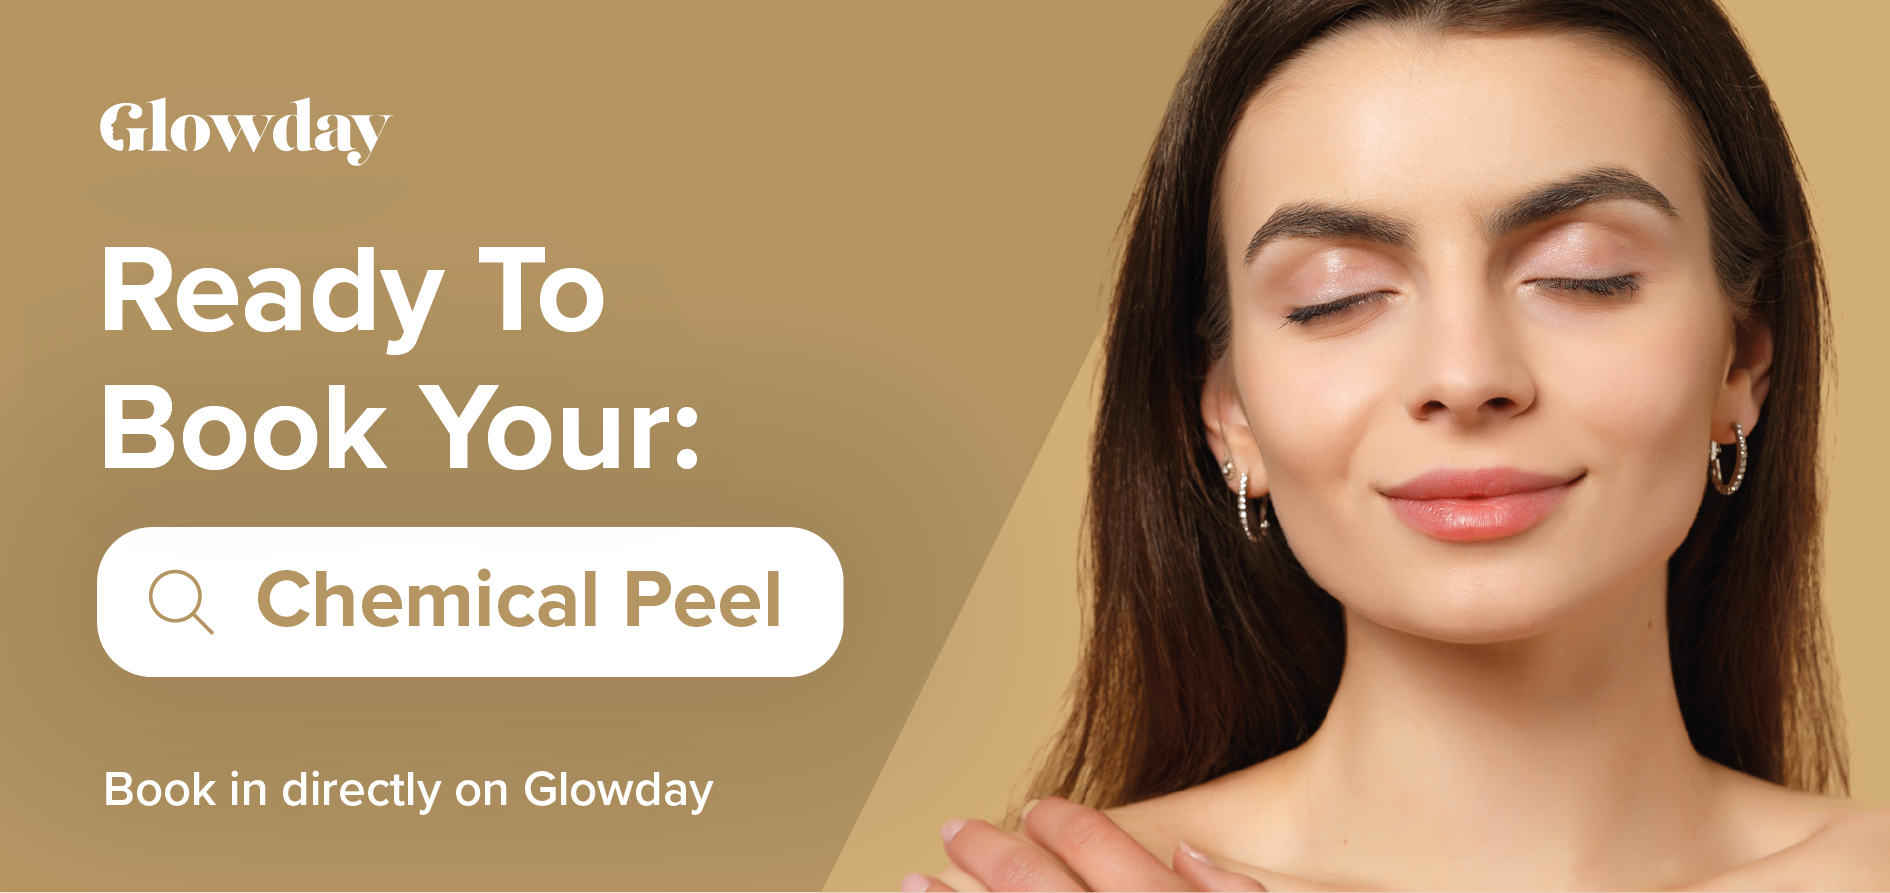 Chemical peel aftercare dos and donts Glowday